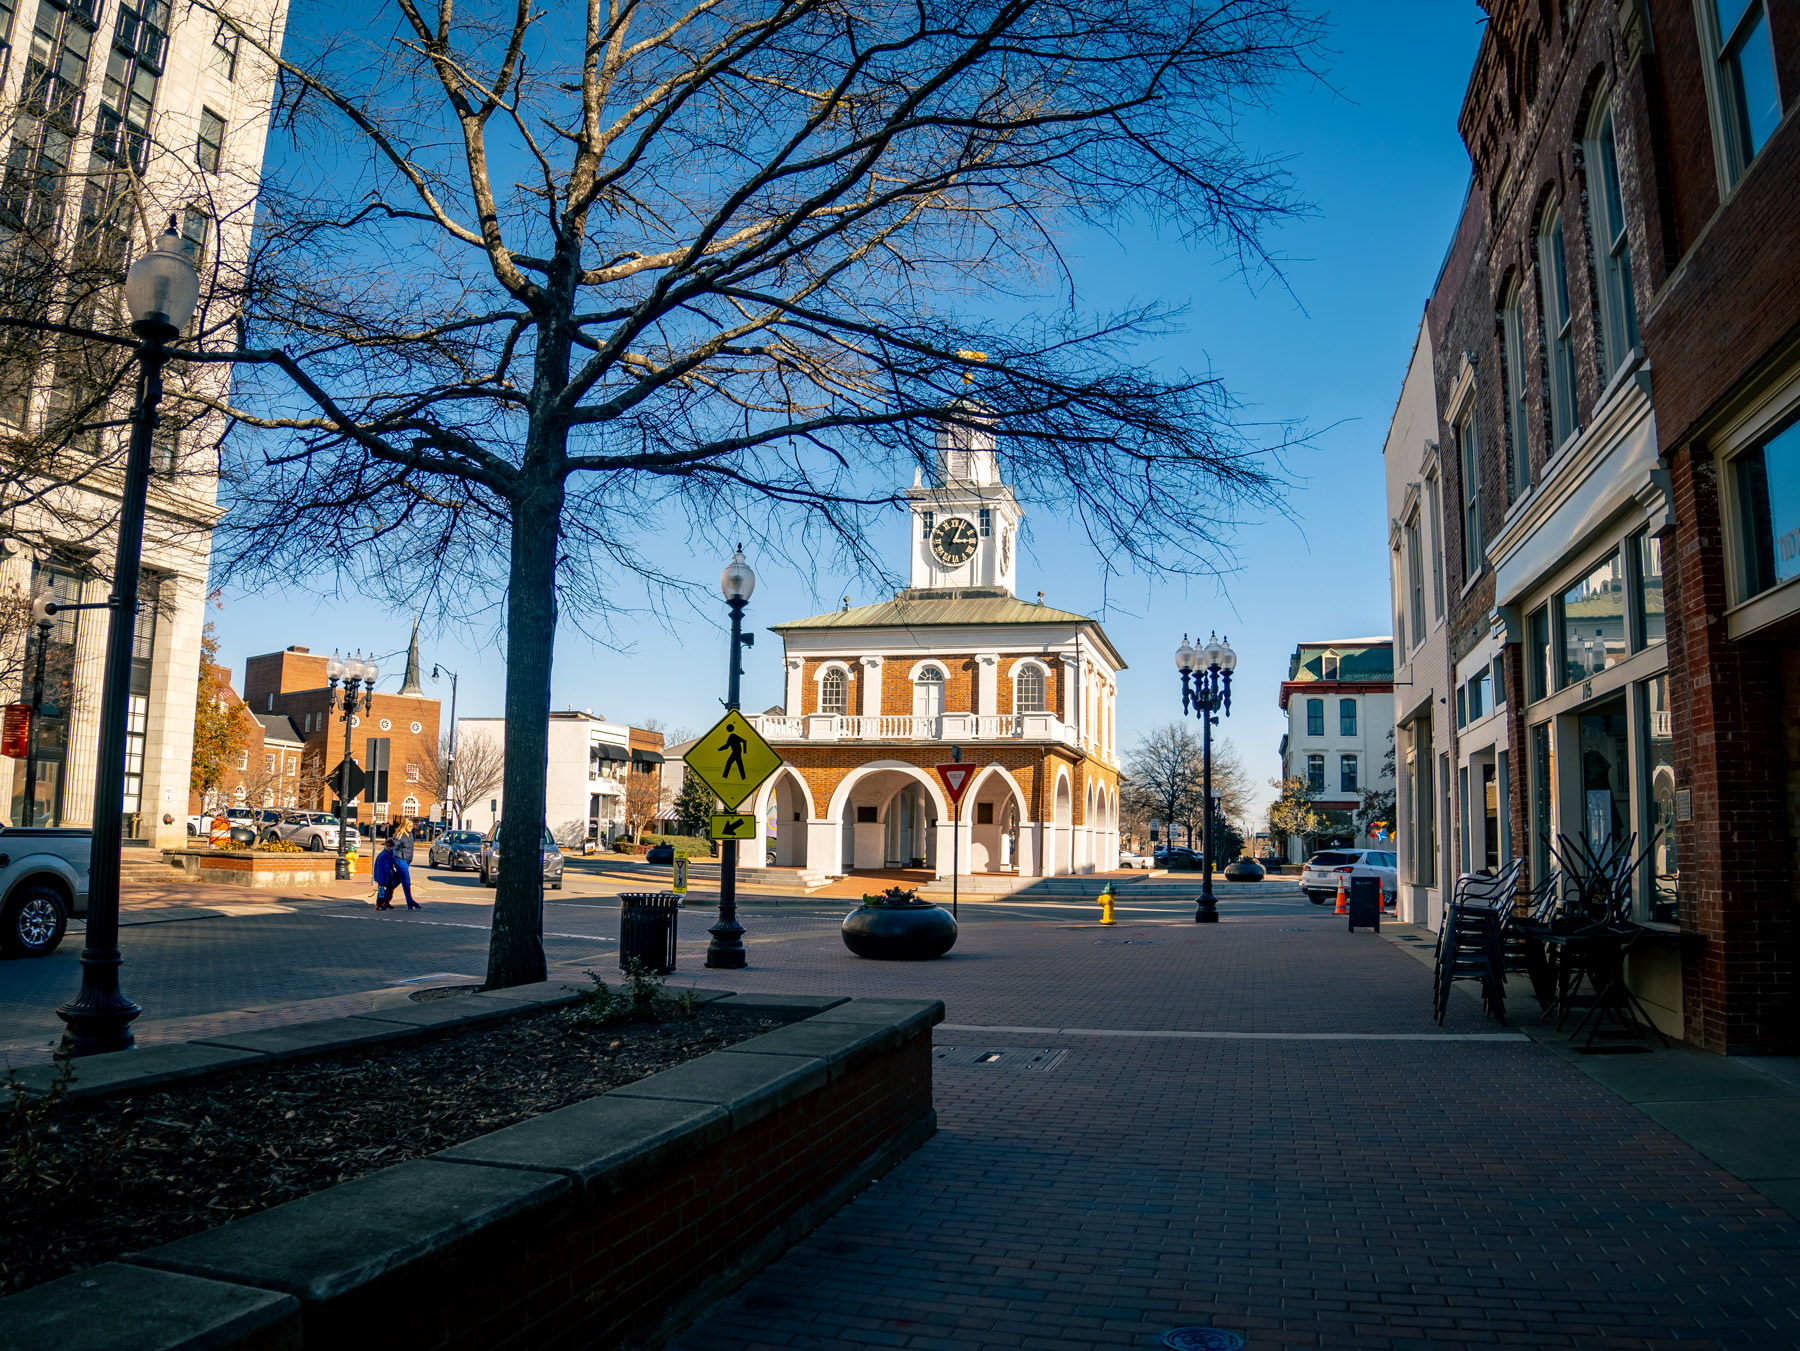 Downtown Fayetteville, NC